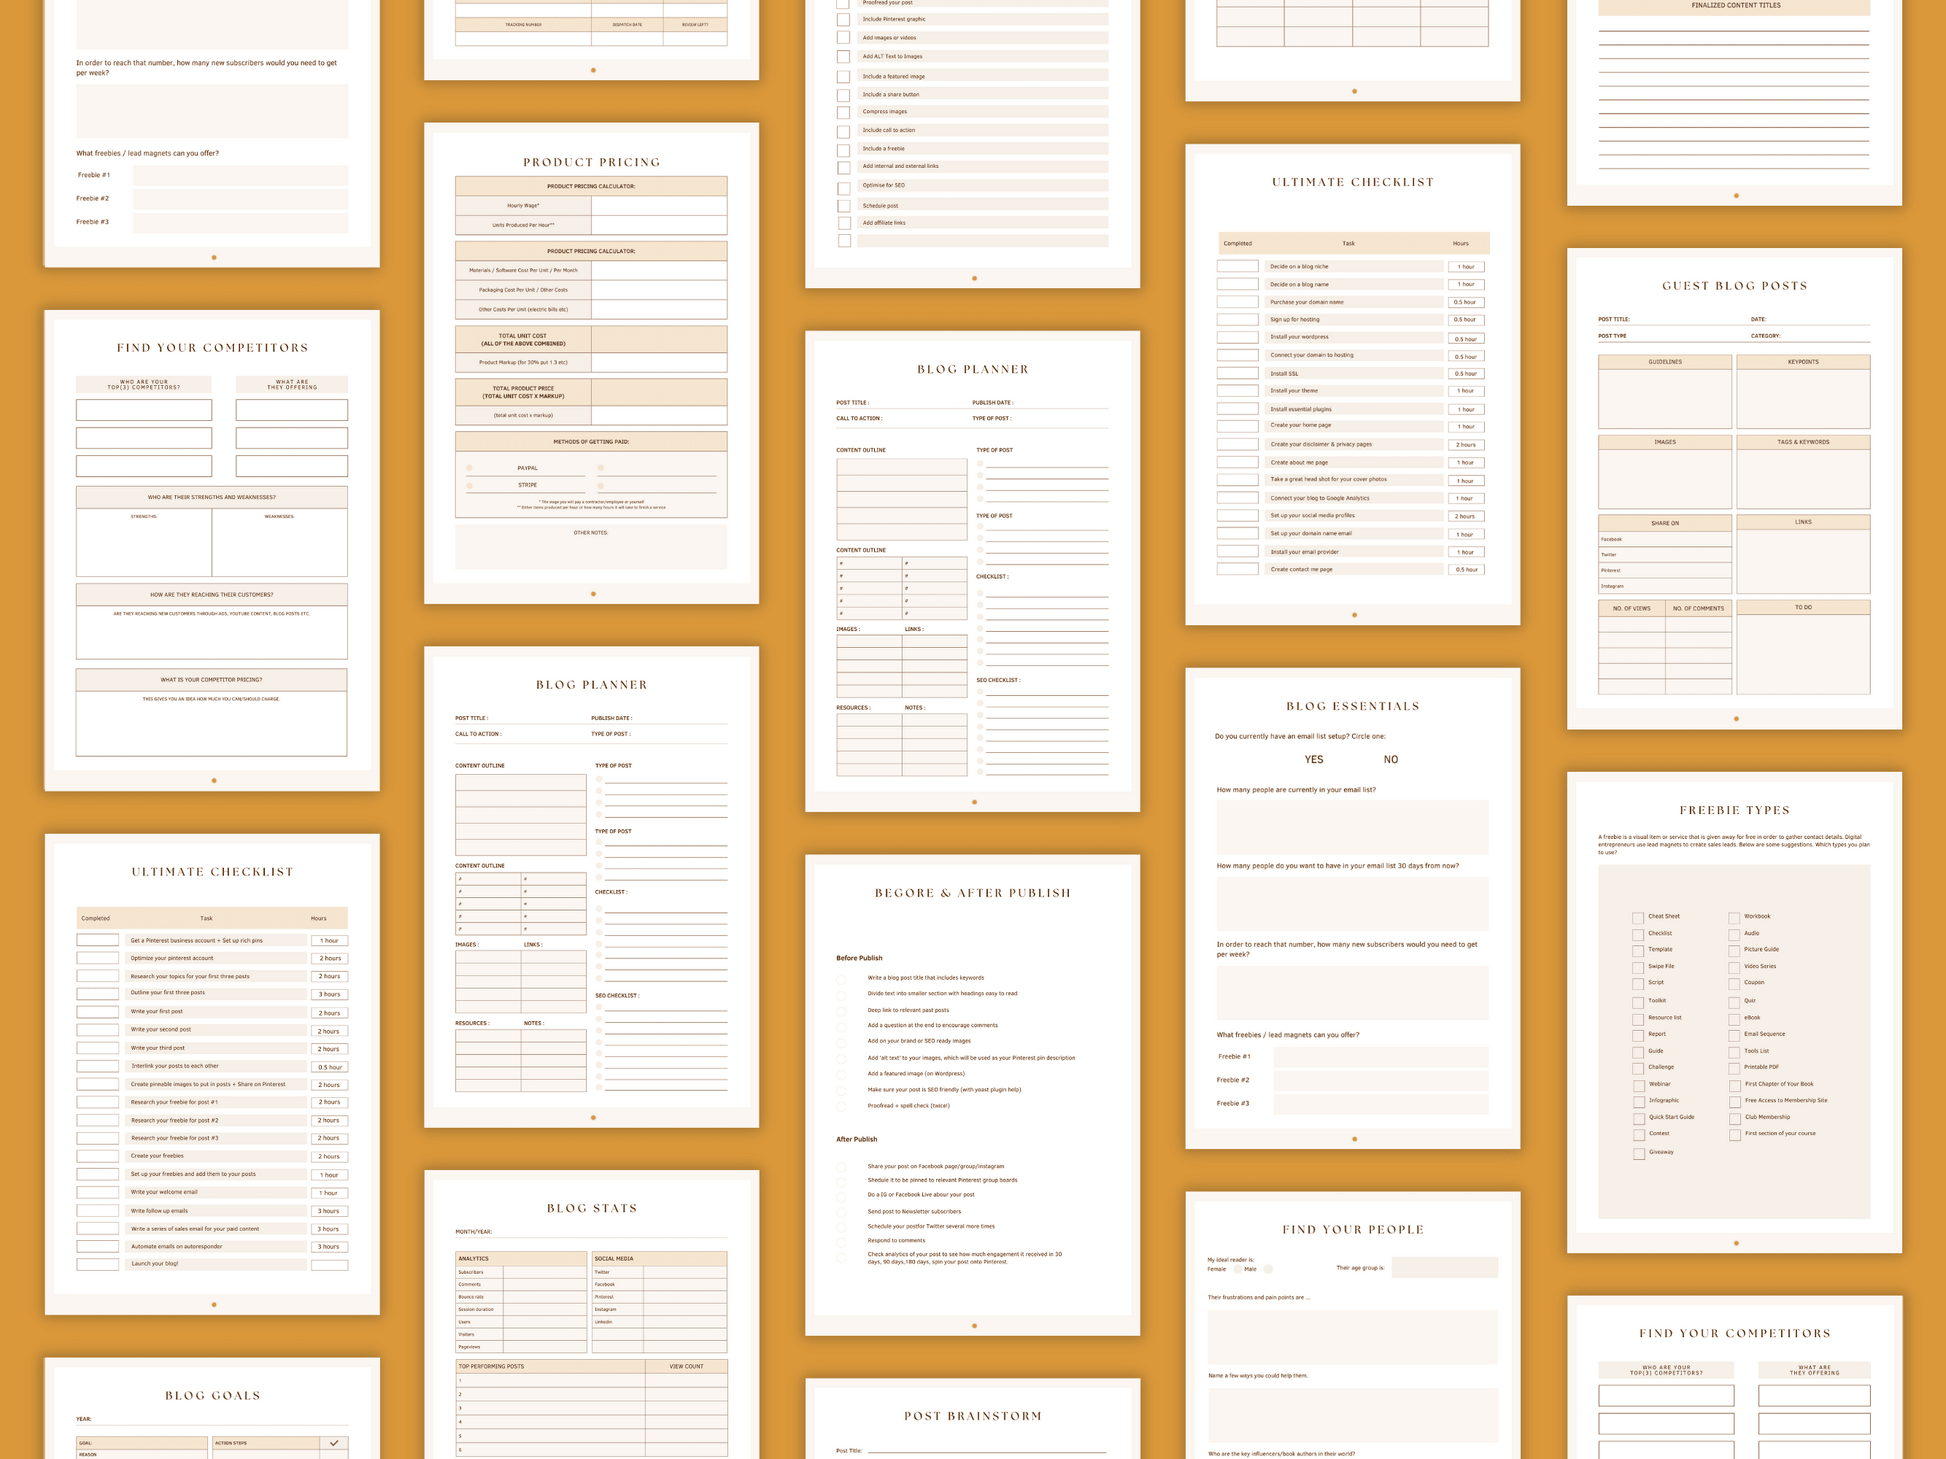 Aesthetic and boho blog content done-for-you planner templates which include e.g. blog essentials, ultimate checklist, blog planner, etc. for content creators and business owners. It's editable in Canva.